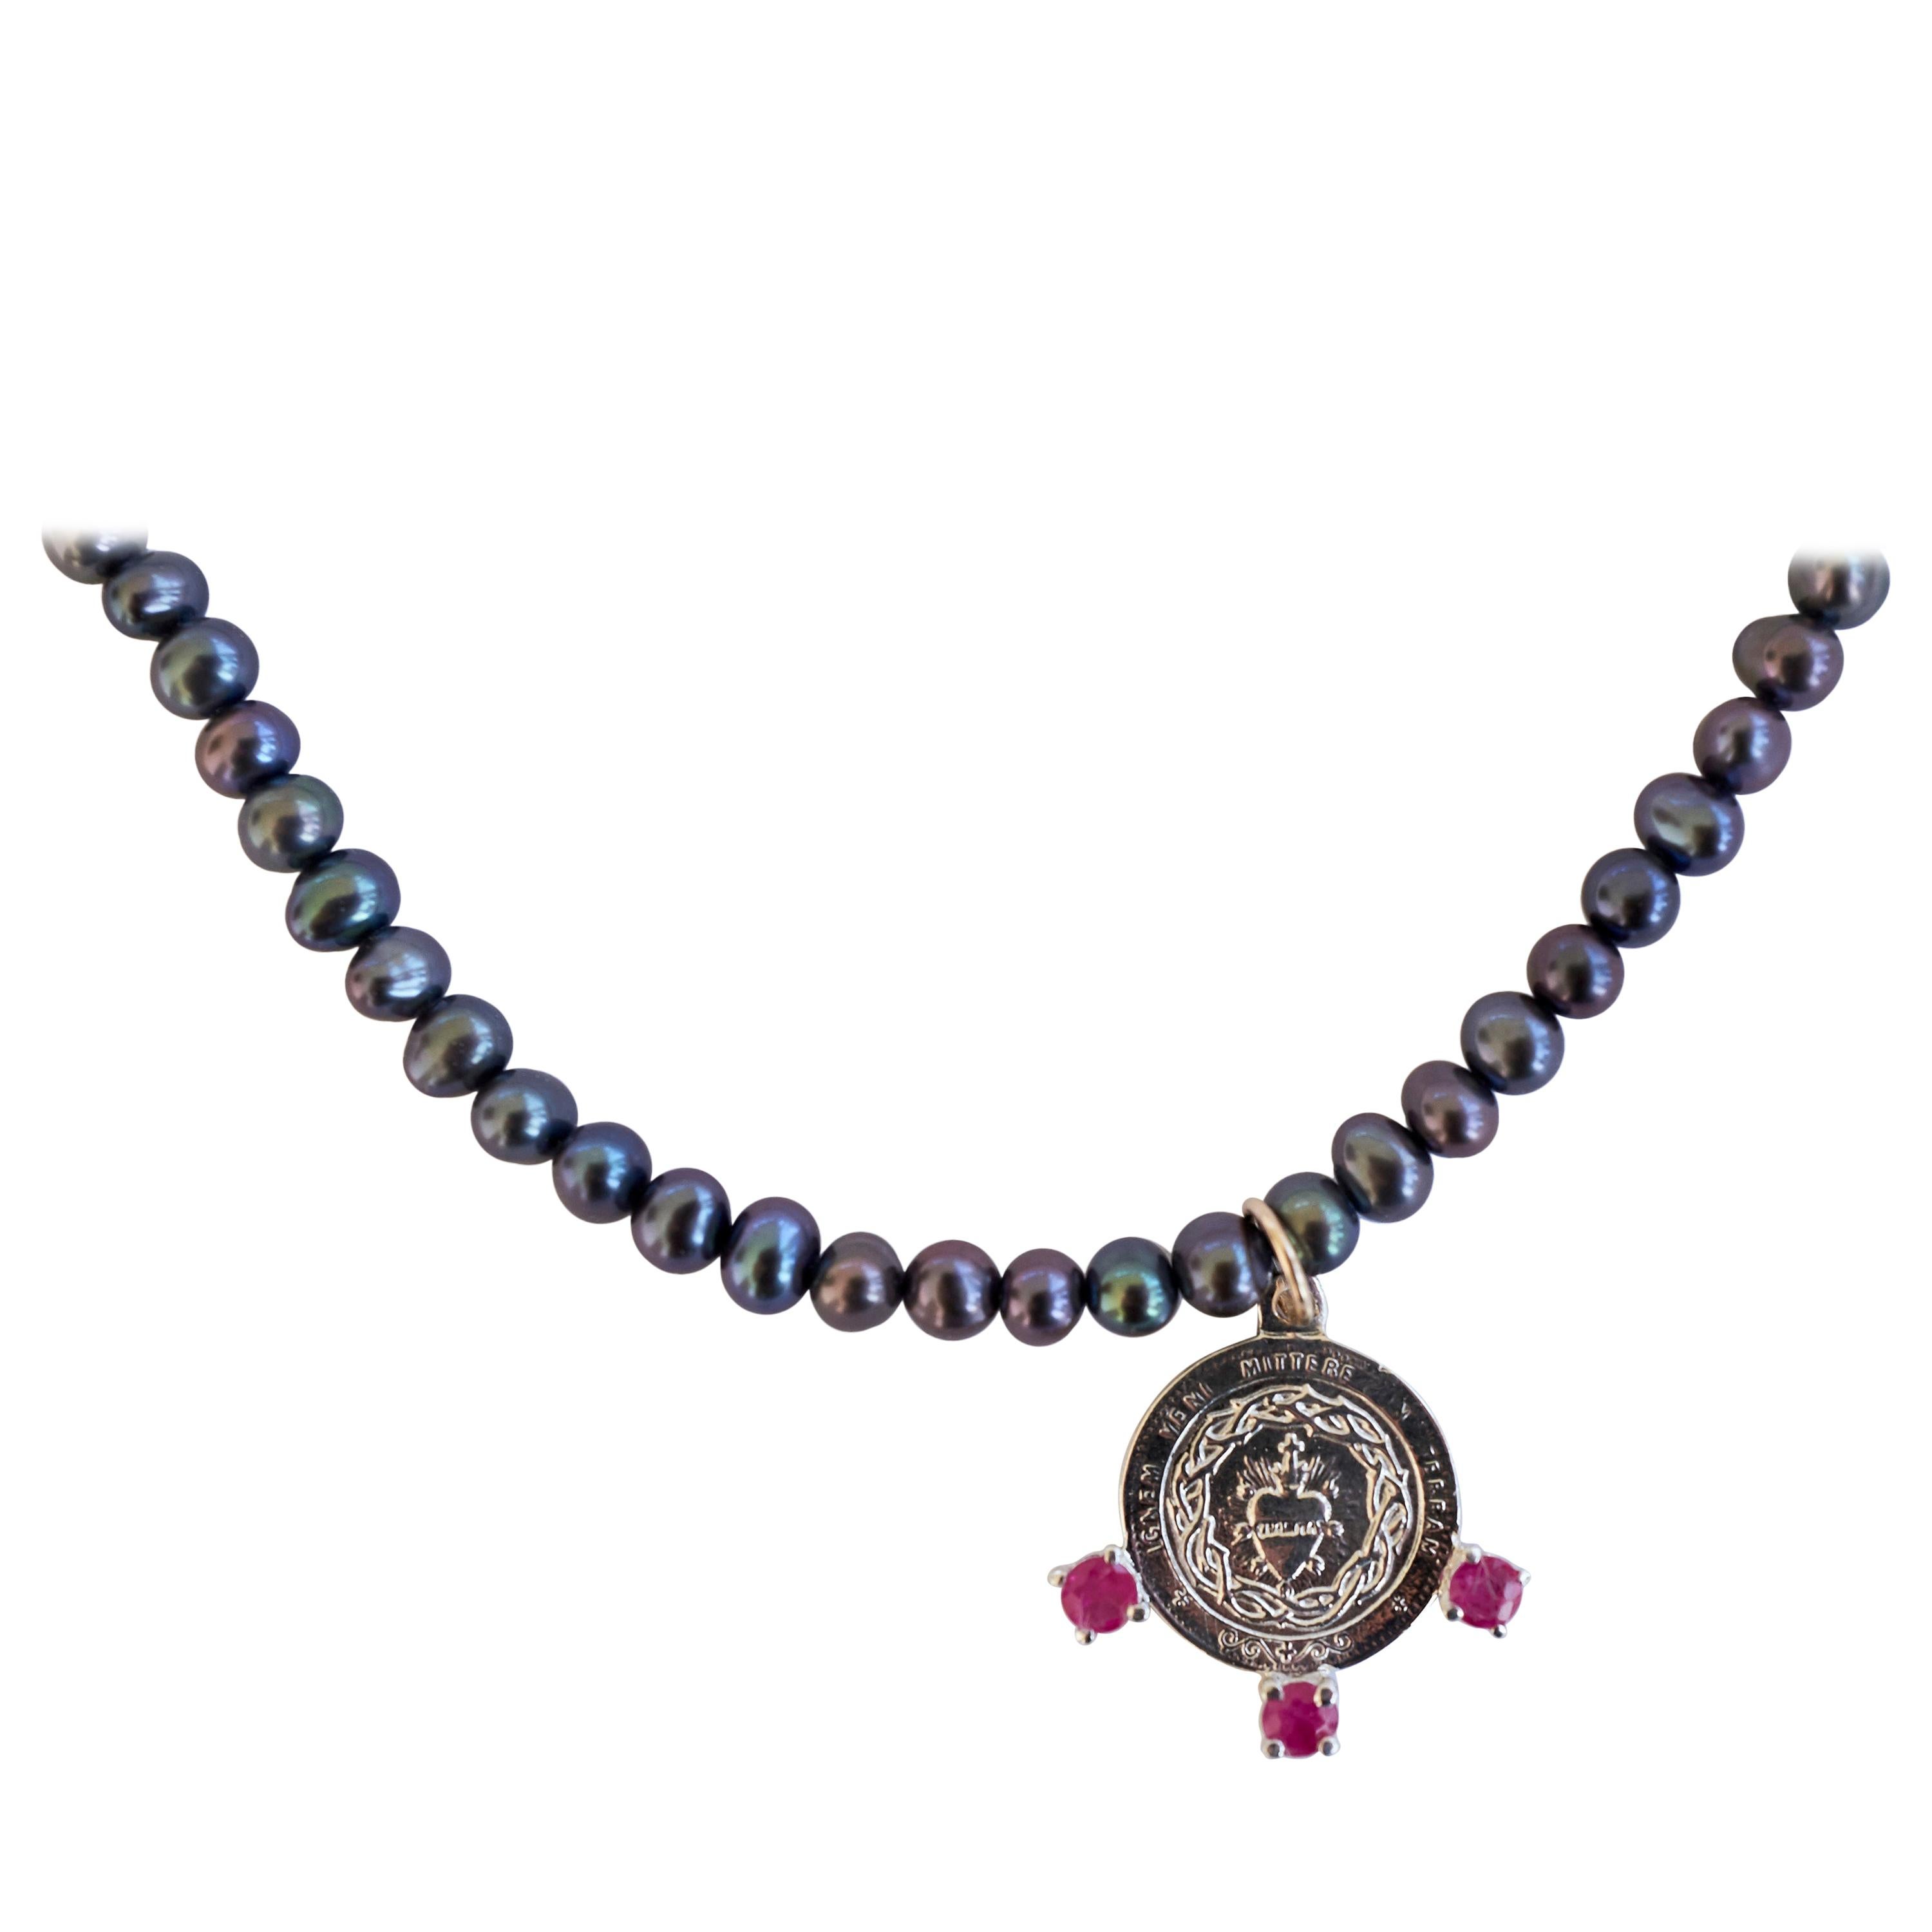 Black Pearl Sacred Heart Medal Pink Tourmaline Silver Chain Necklace J Dauphin